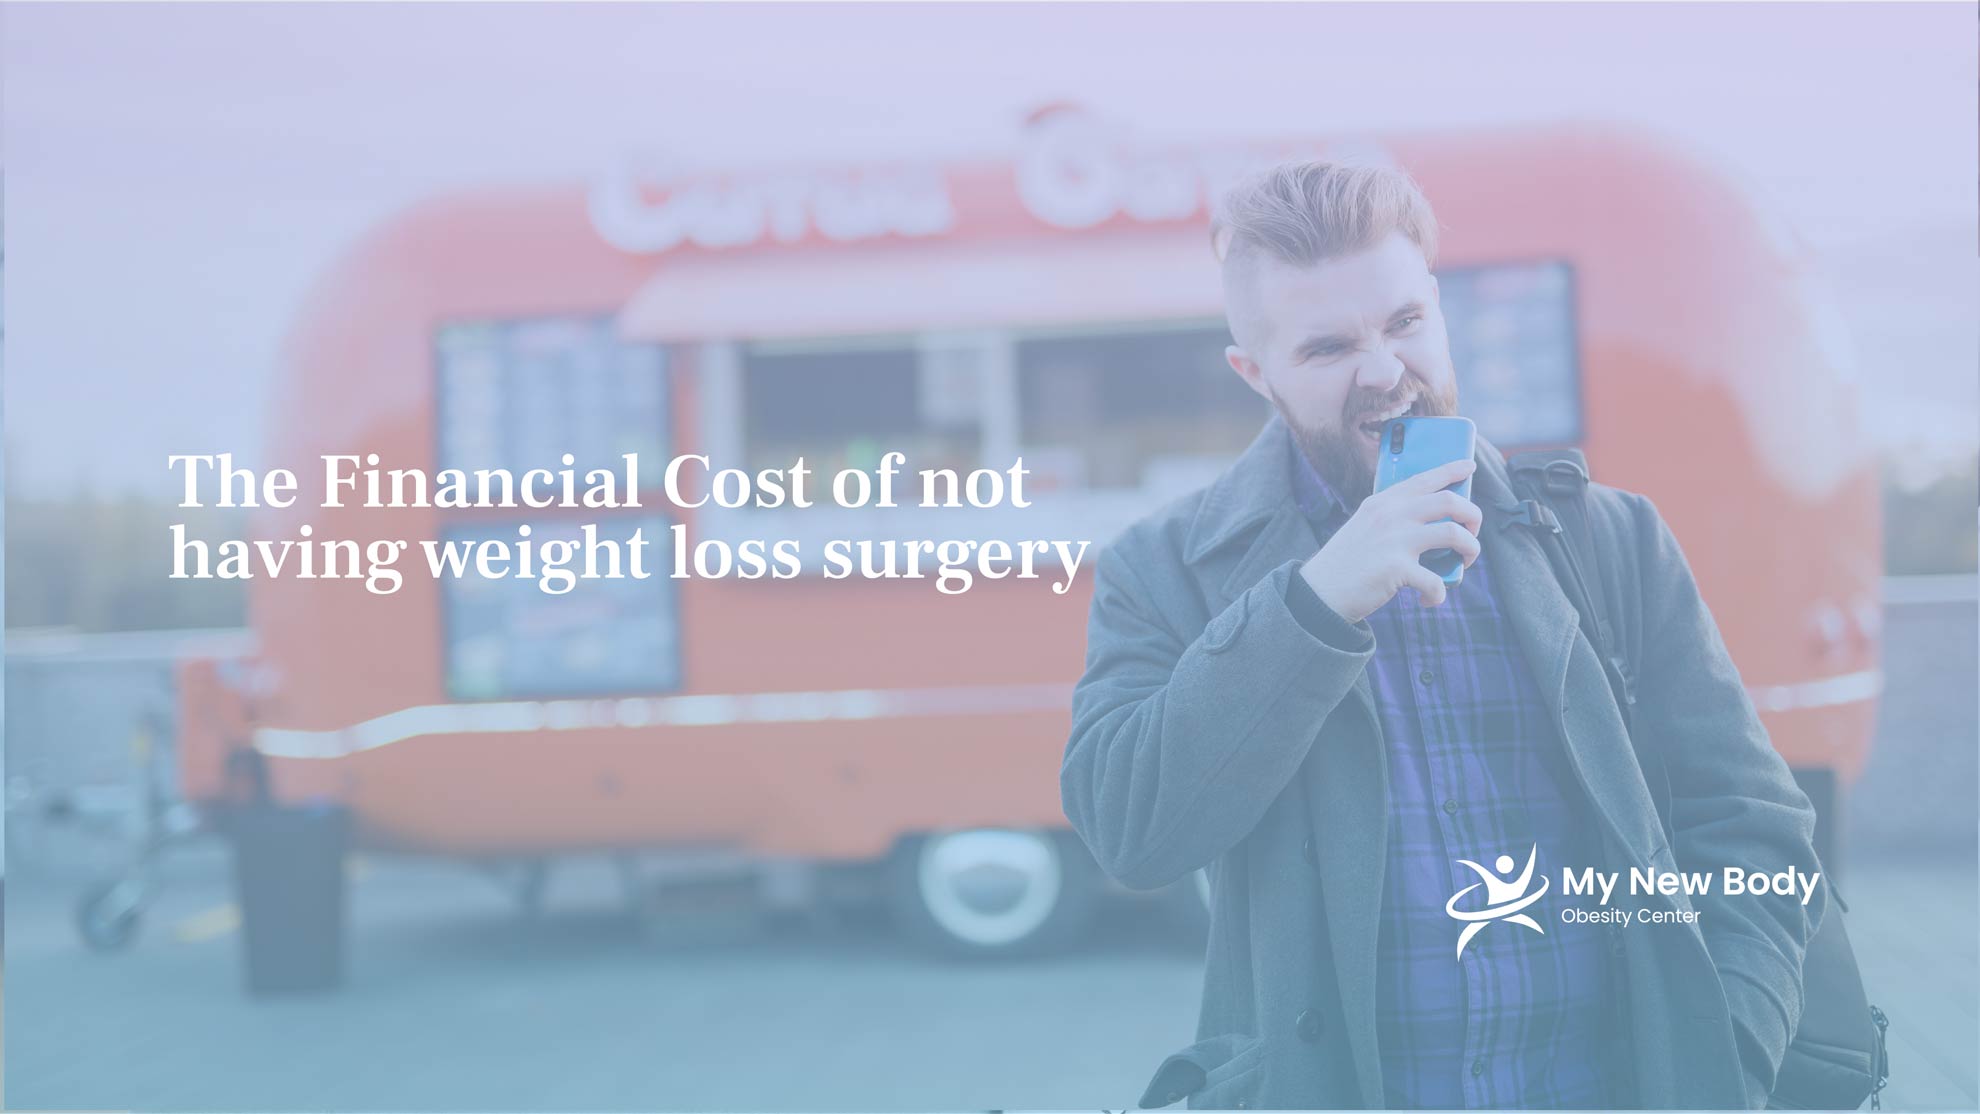 The Financial Cost of not having weight loss surgery